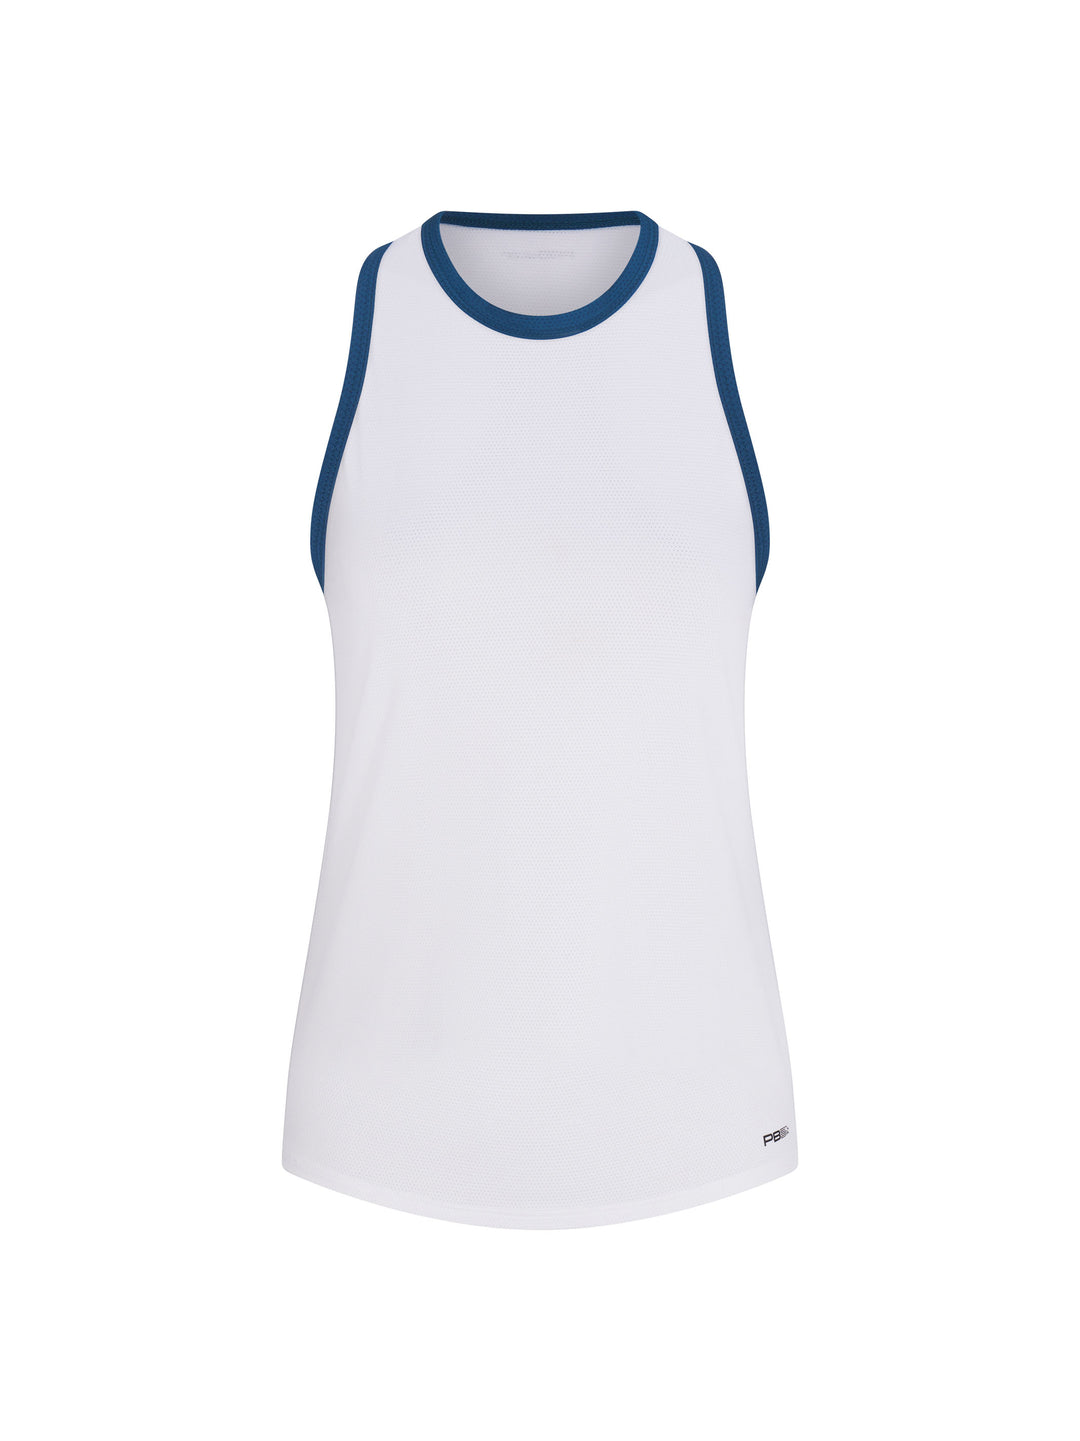 Women's Core Tank front view in White with Astral Blue trim. Small logo printed on lower left front.